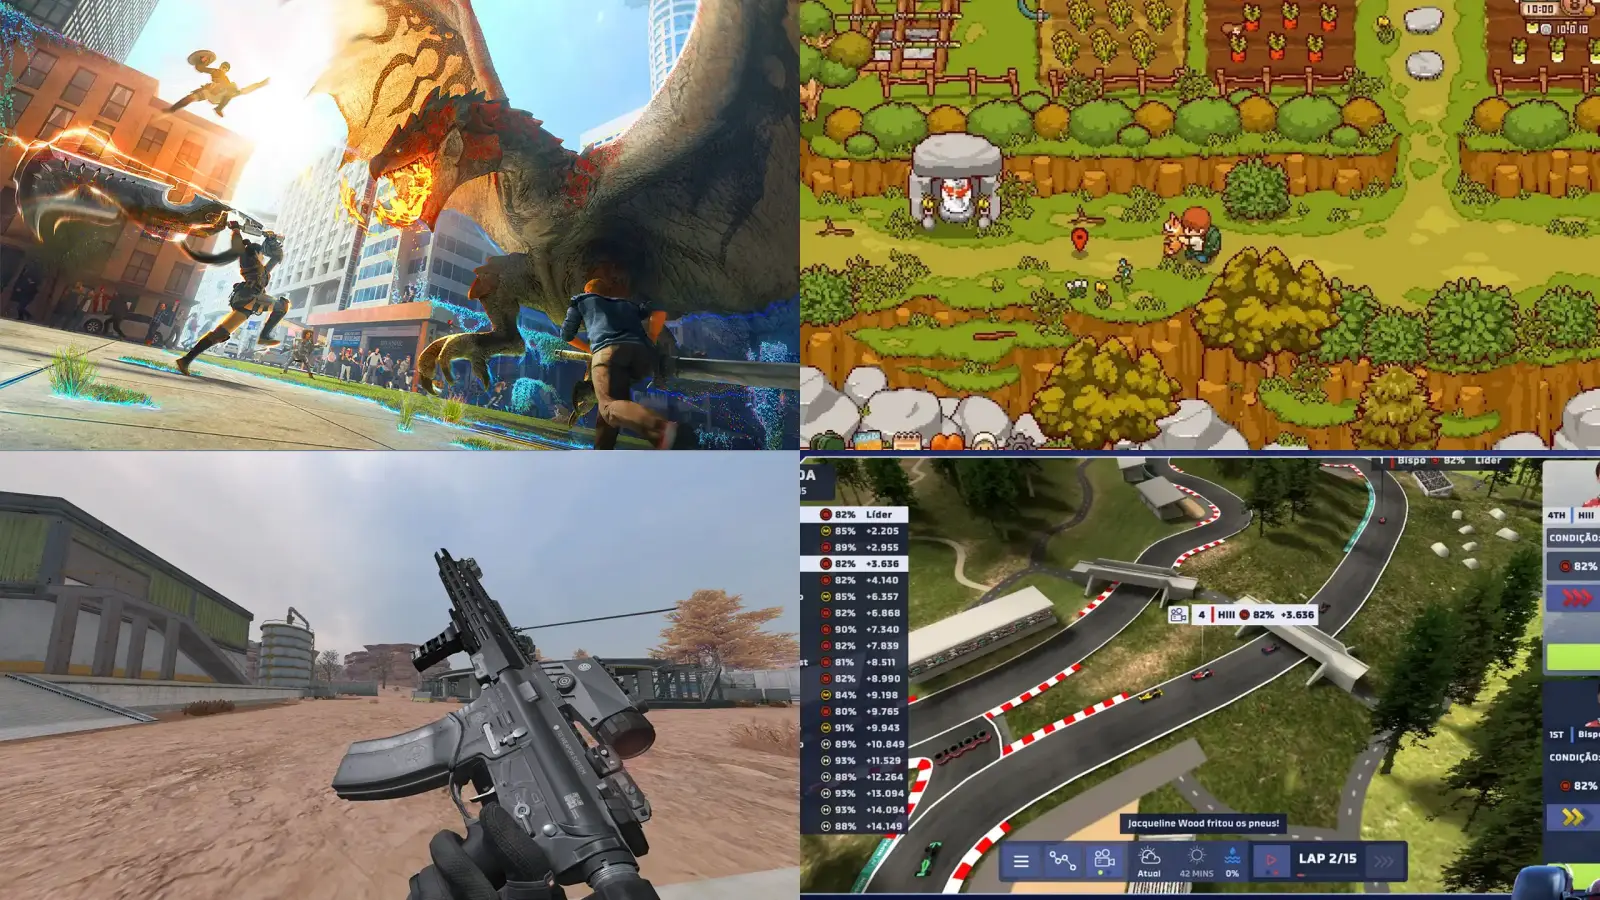 Image shows various screenshots of mobile games